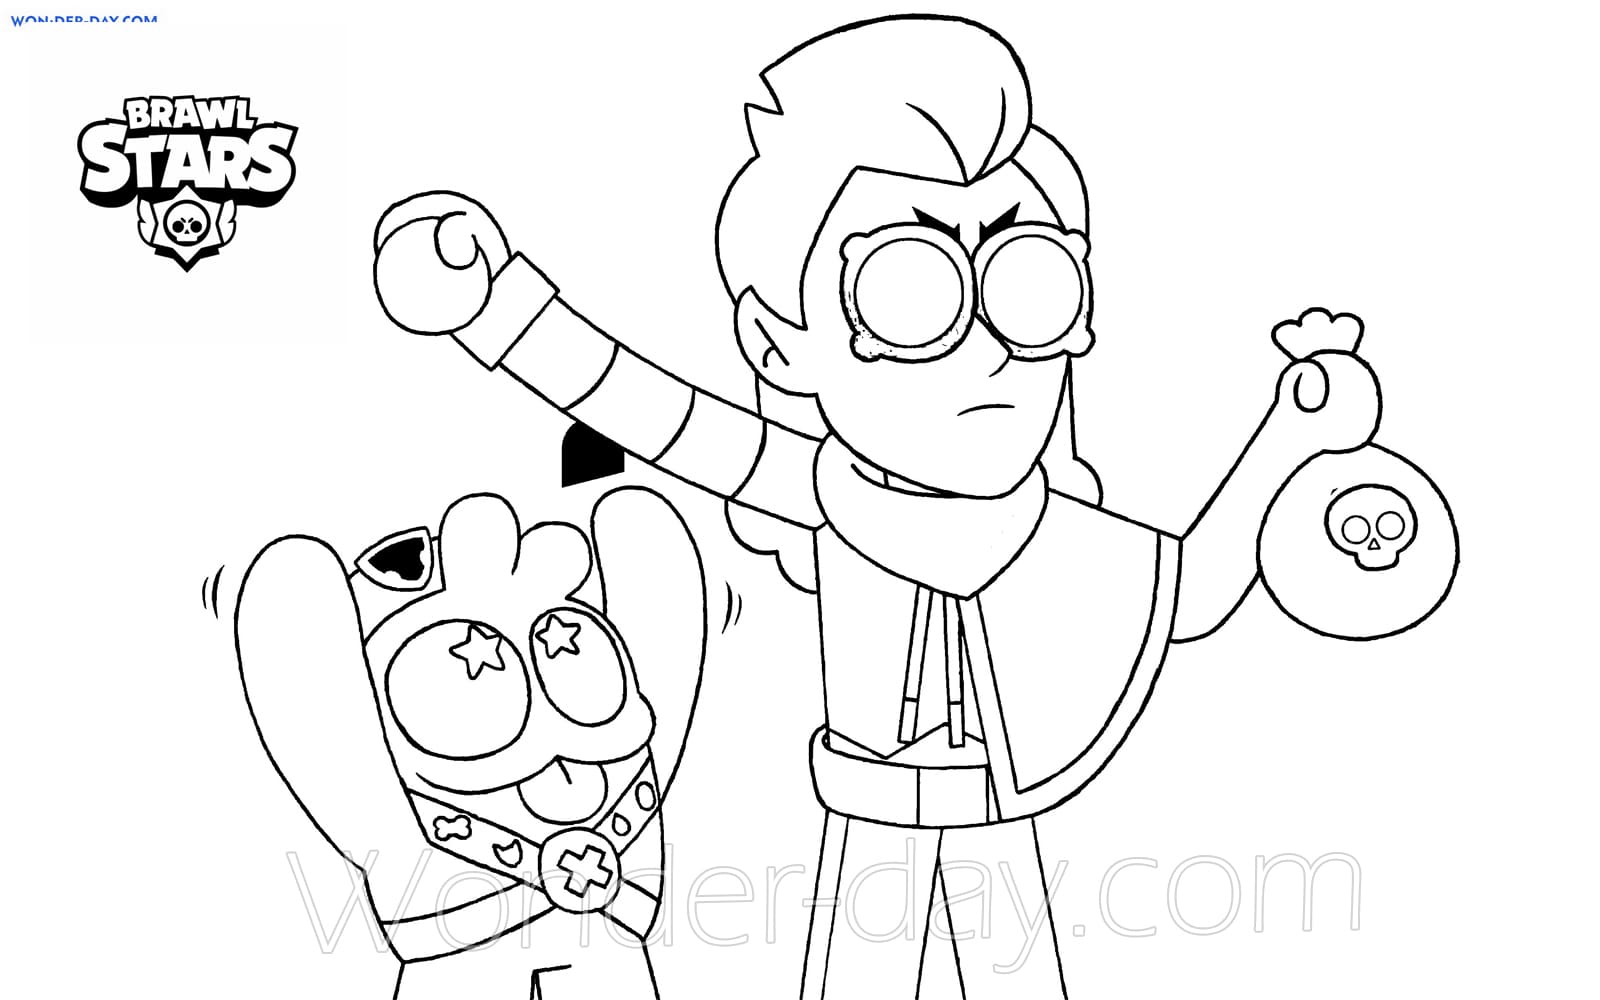 Squeak Brawl Stars Coloring Pages Wonder Day Coloring Pages For Children And Adults - squeaky belle brawl stars